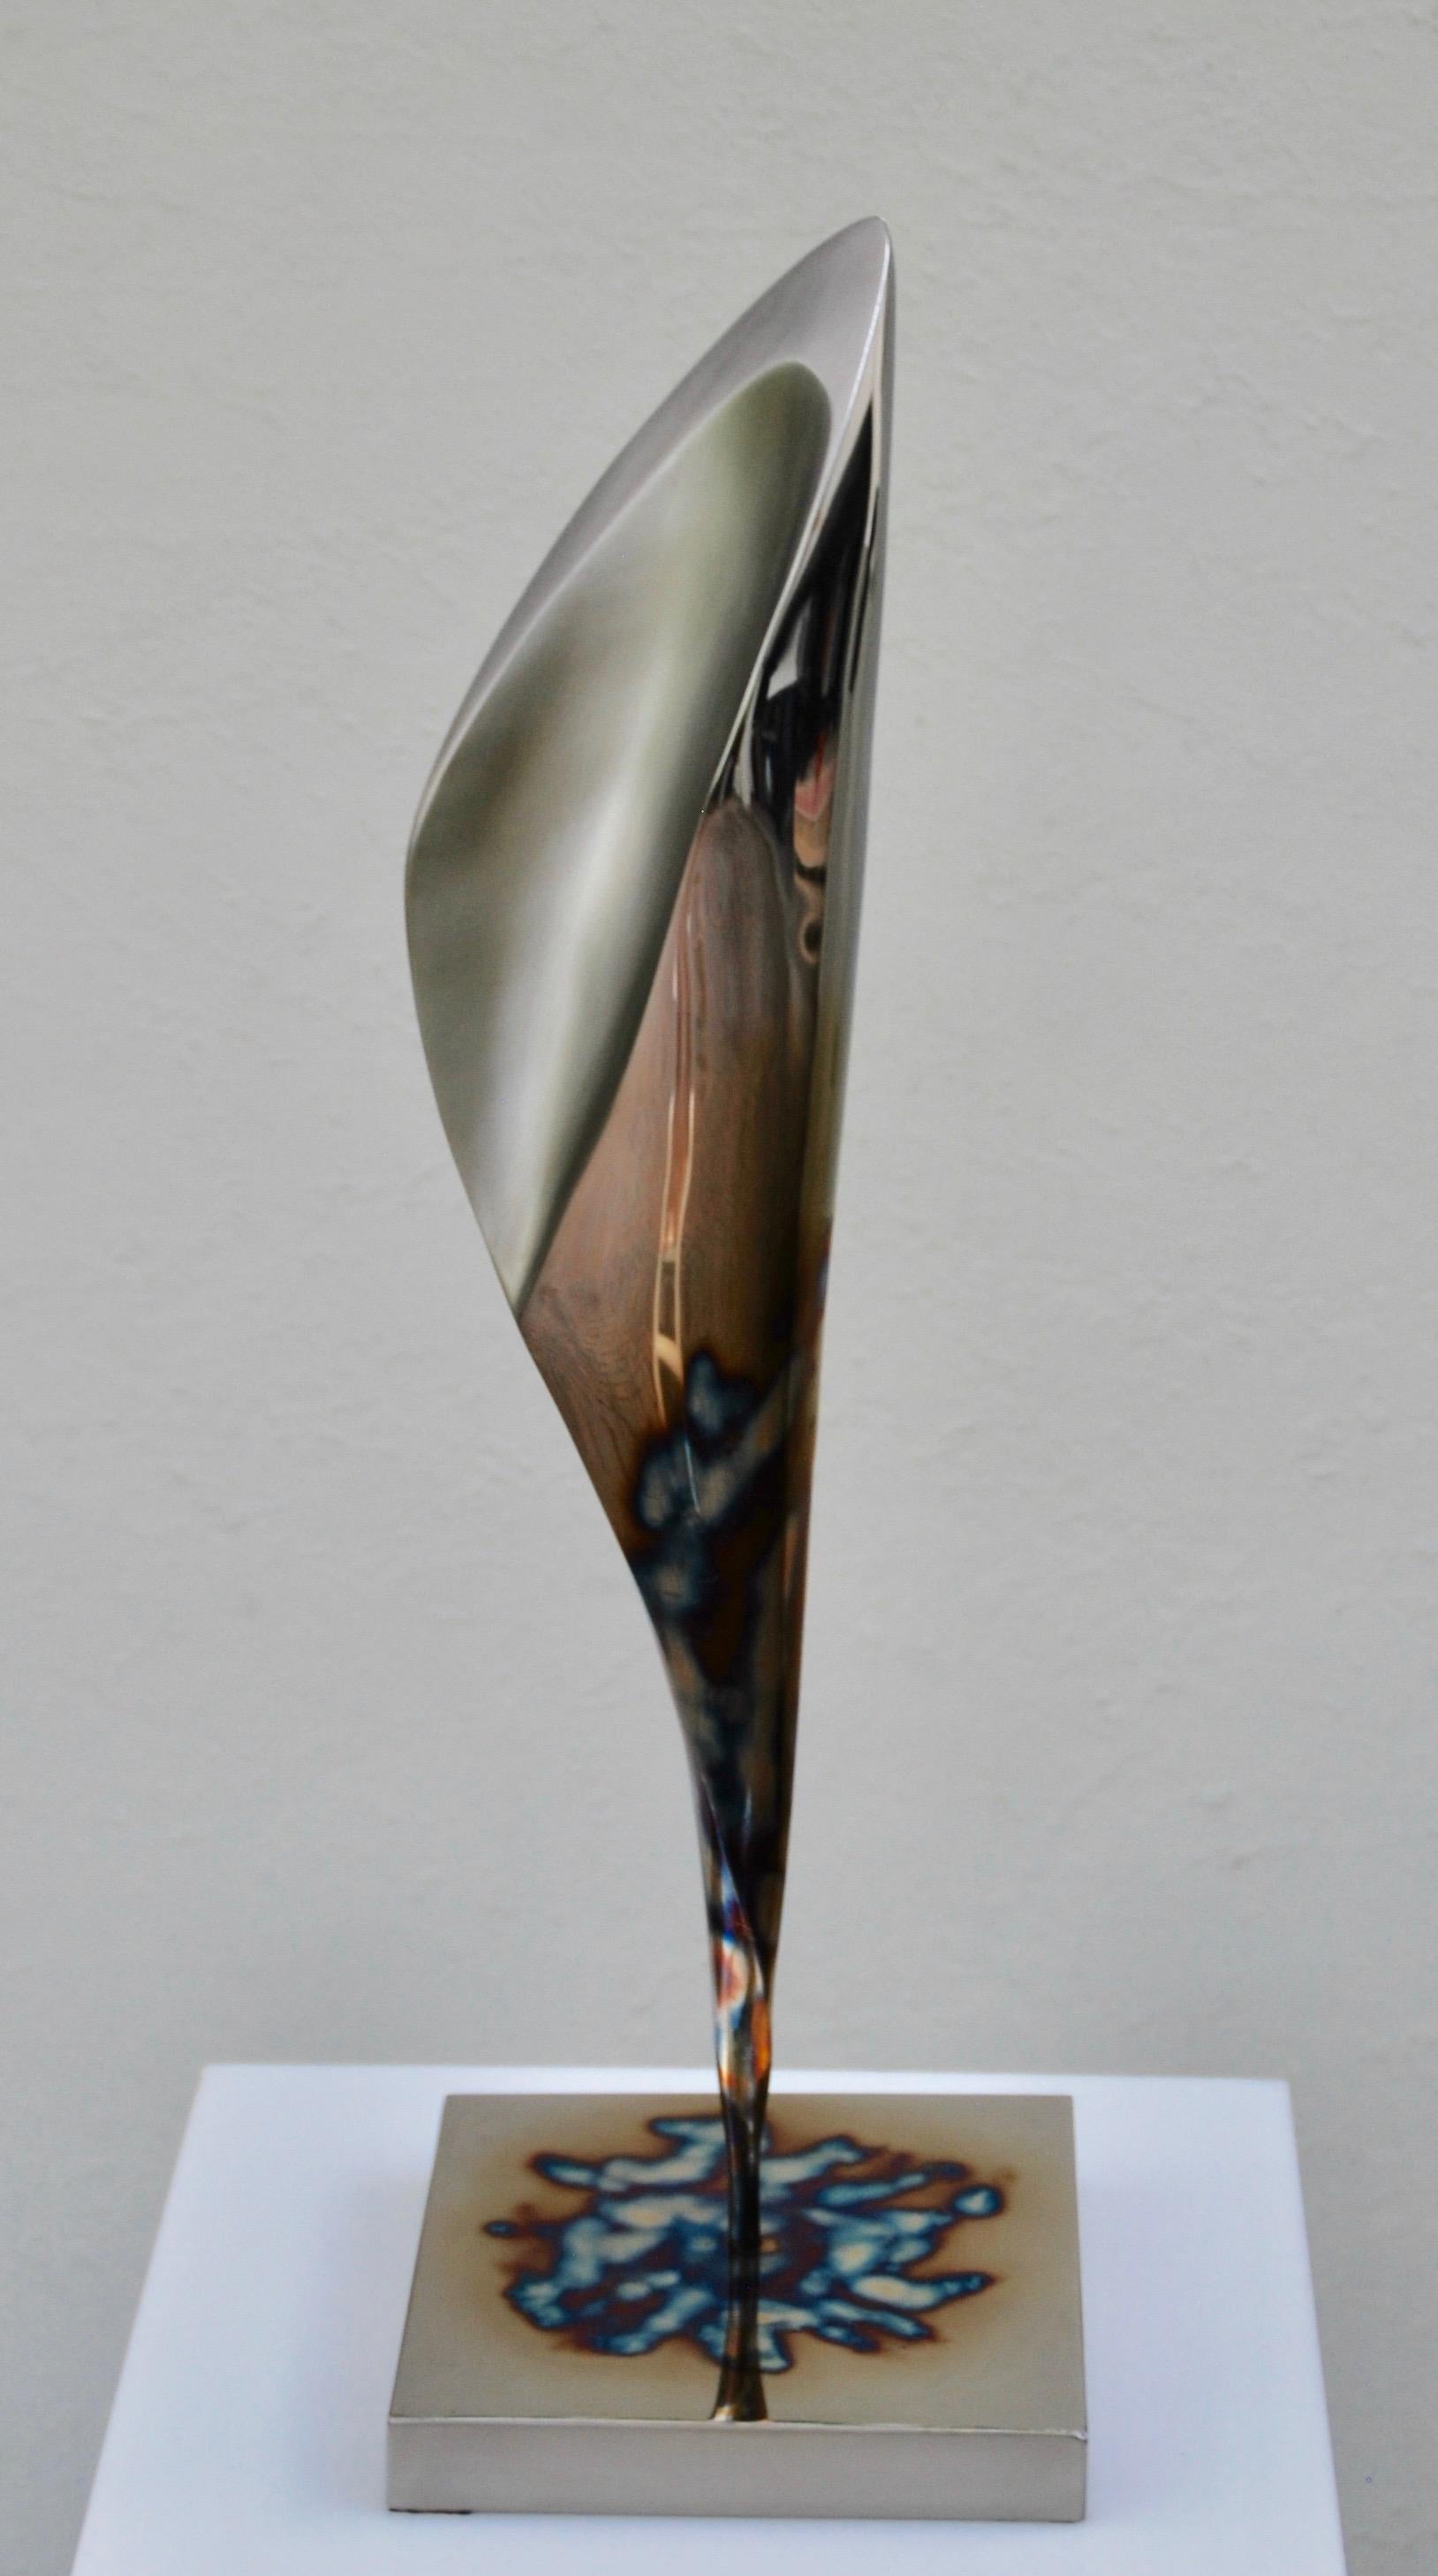 INNER STRENGTH (TABLE TOP) - Abstract Sculpture by Santiago Medina